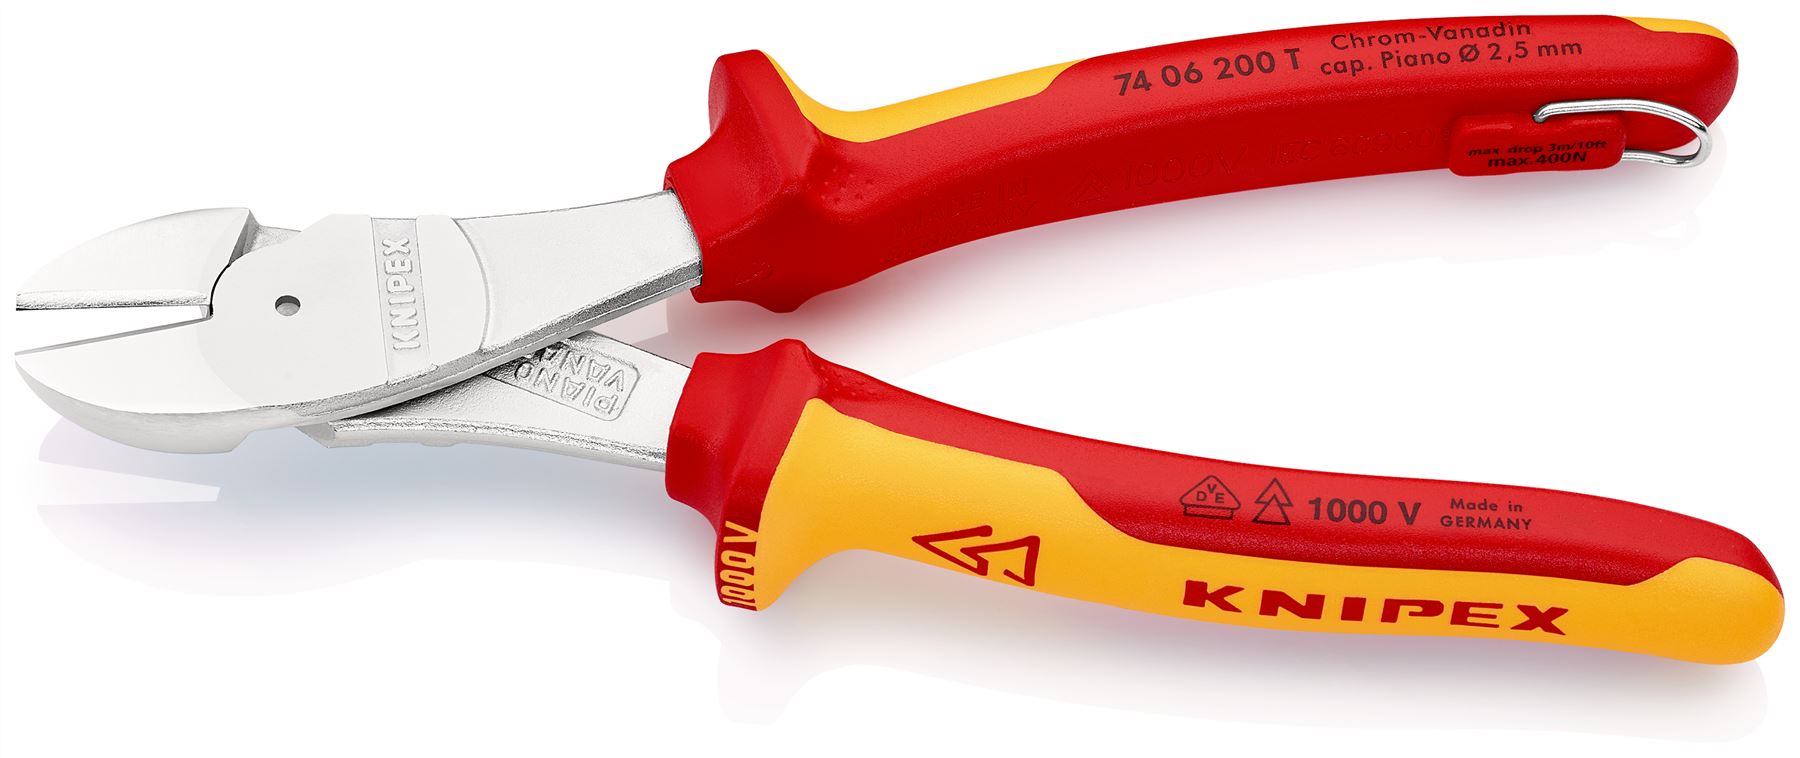 KNIPEX Diagonal Cutting Pliers High Leverage Side Cutters 200mm VDE Multi Component Tether Point 74 06 200 T BK